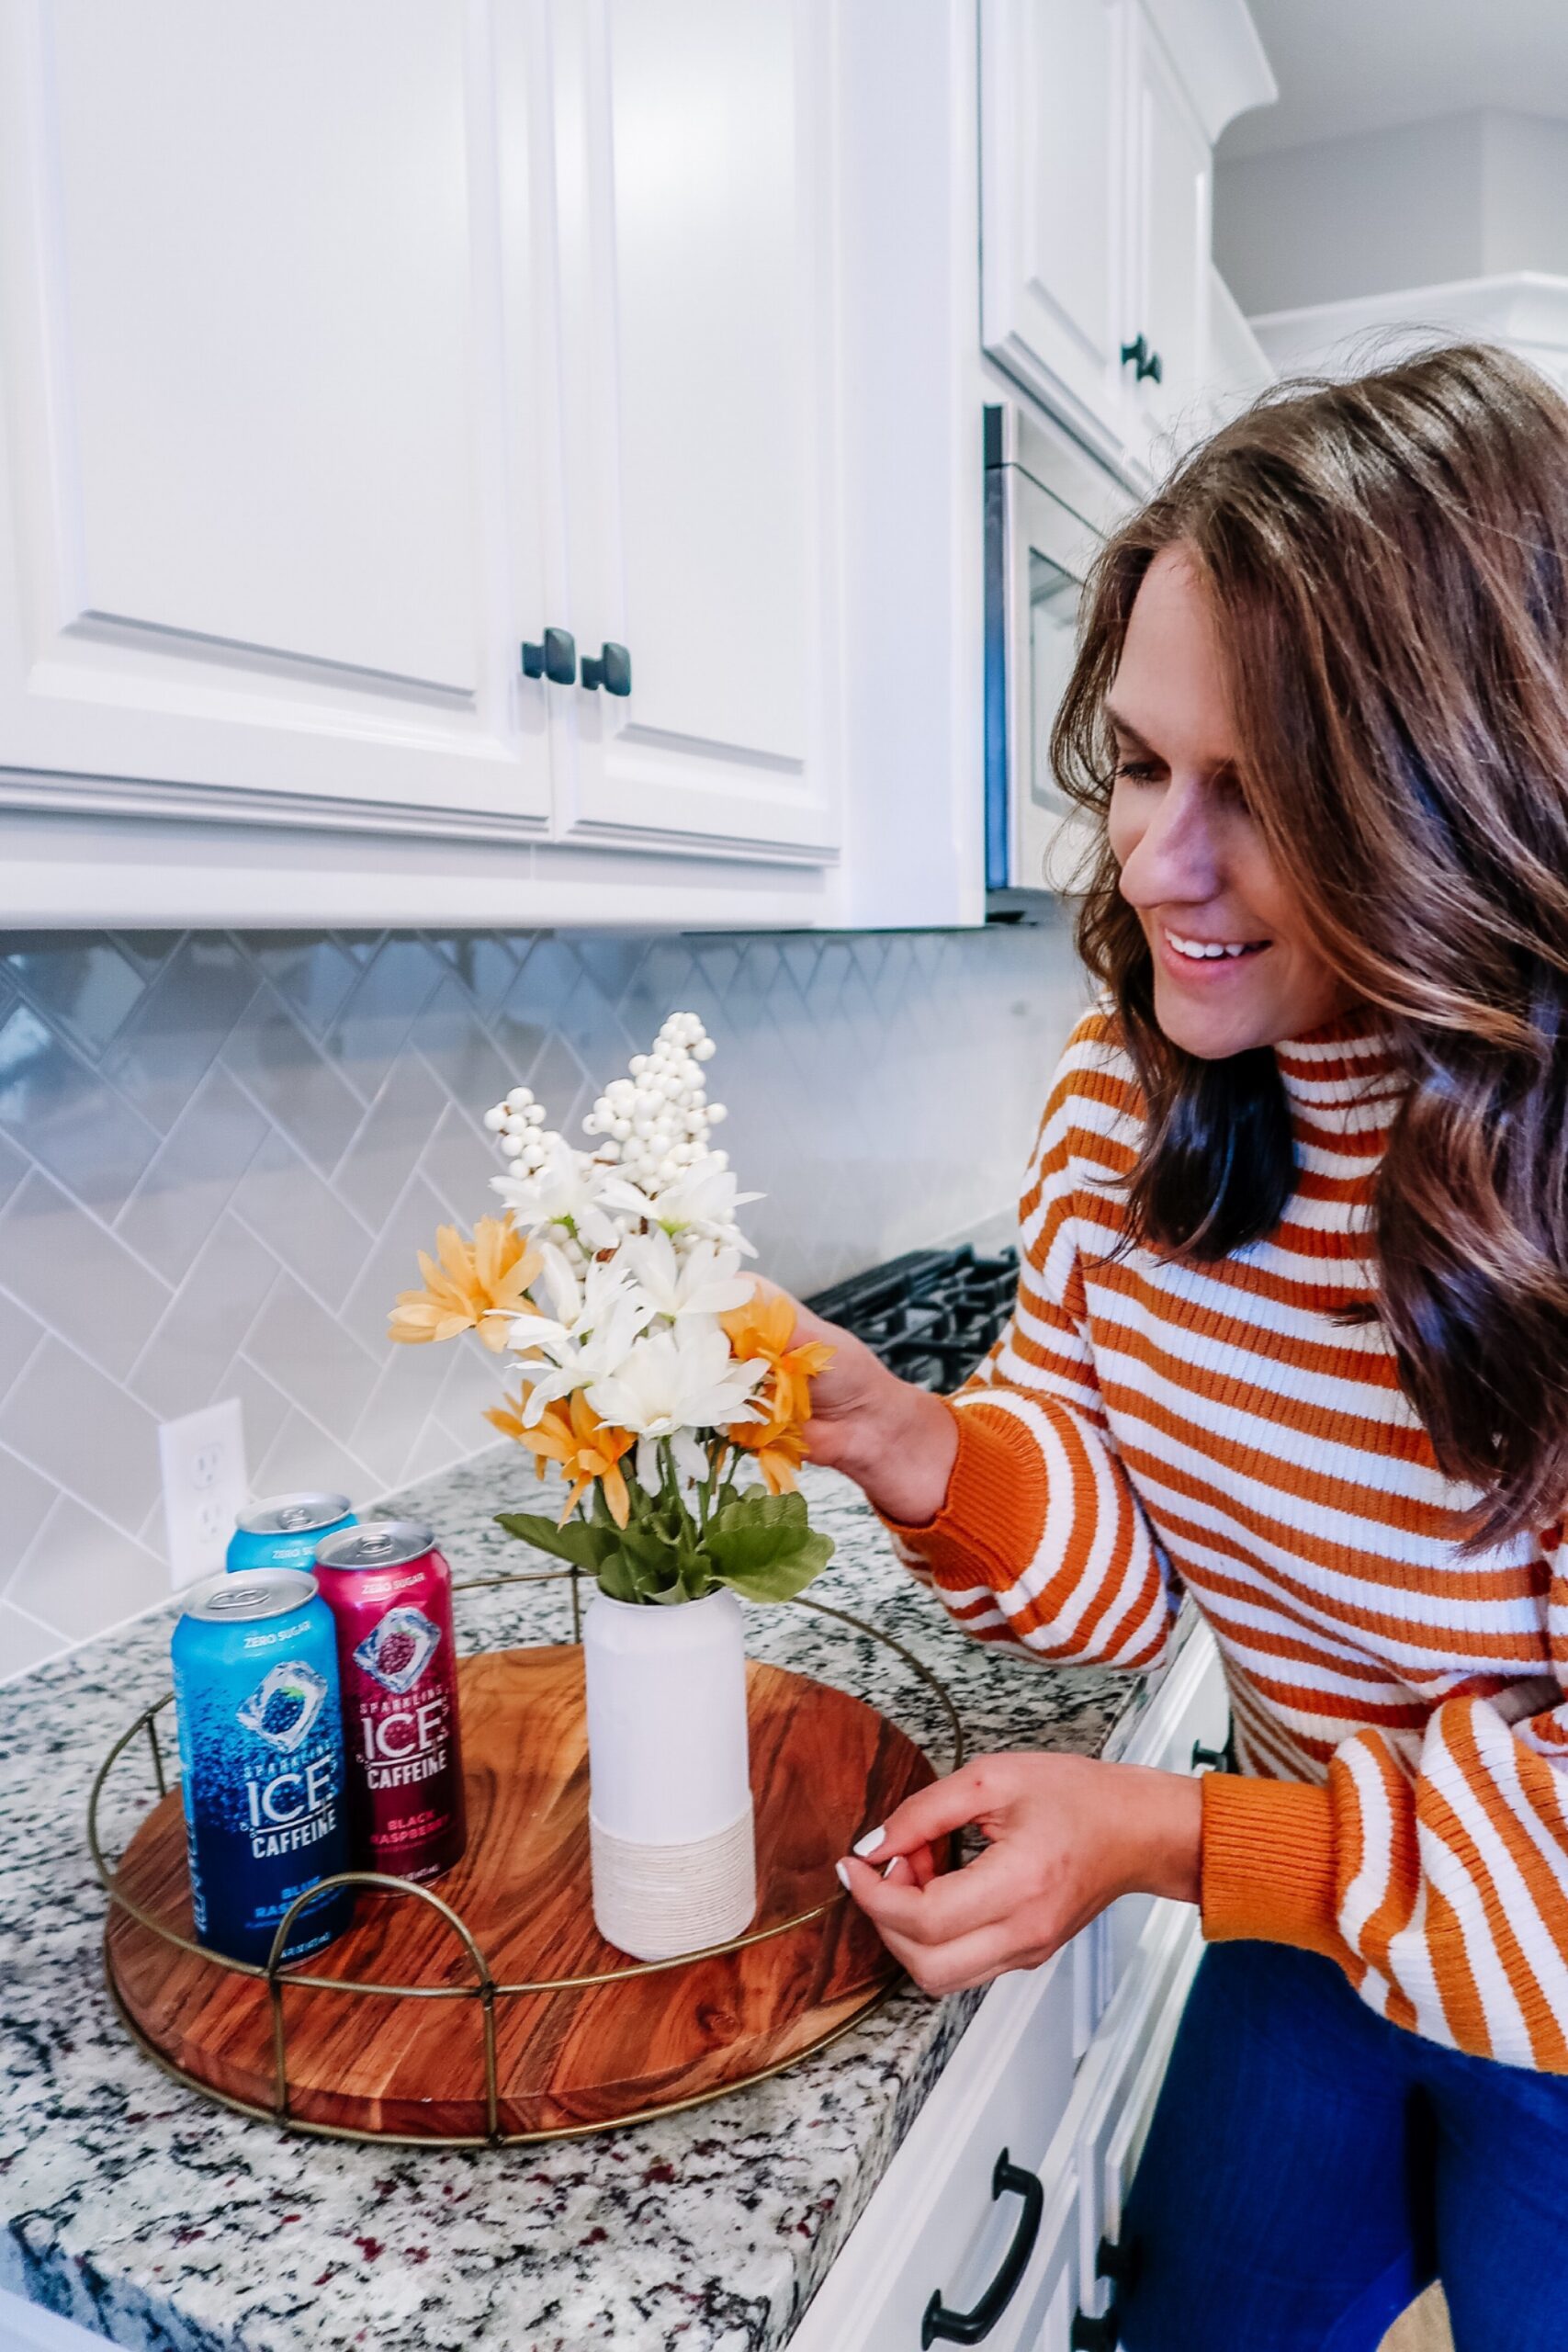 A woman is creating a DIY holiday centerpiece by arranging flowers in a vase in the kitchen.